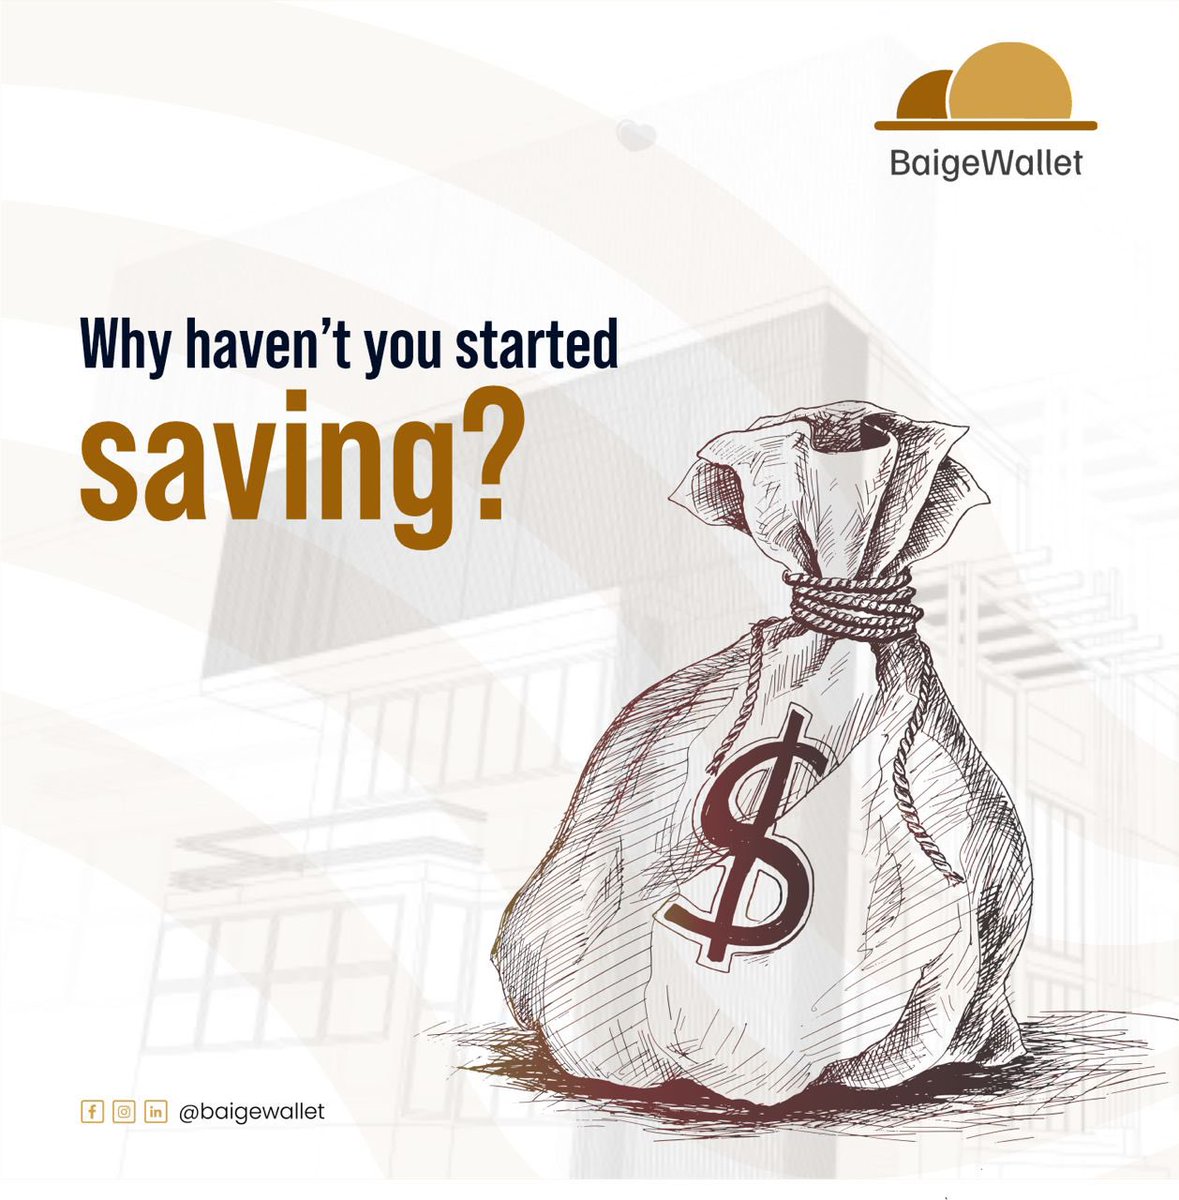 Why haven’t you started saving? 🤔

Tell us in the comment section 🤗

#baigewallet #investment #savings #savingtips #savingmoney